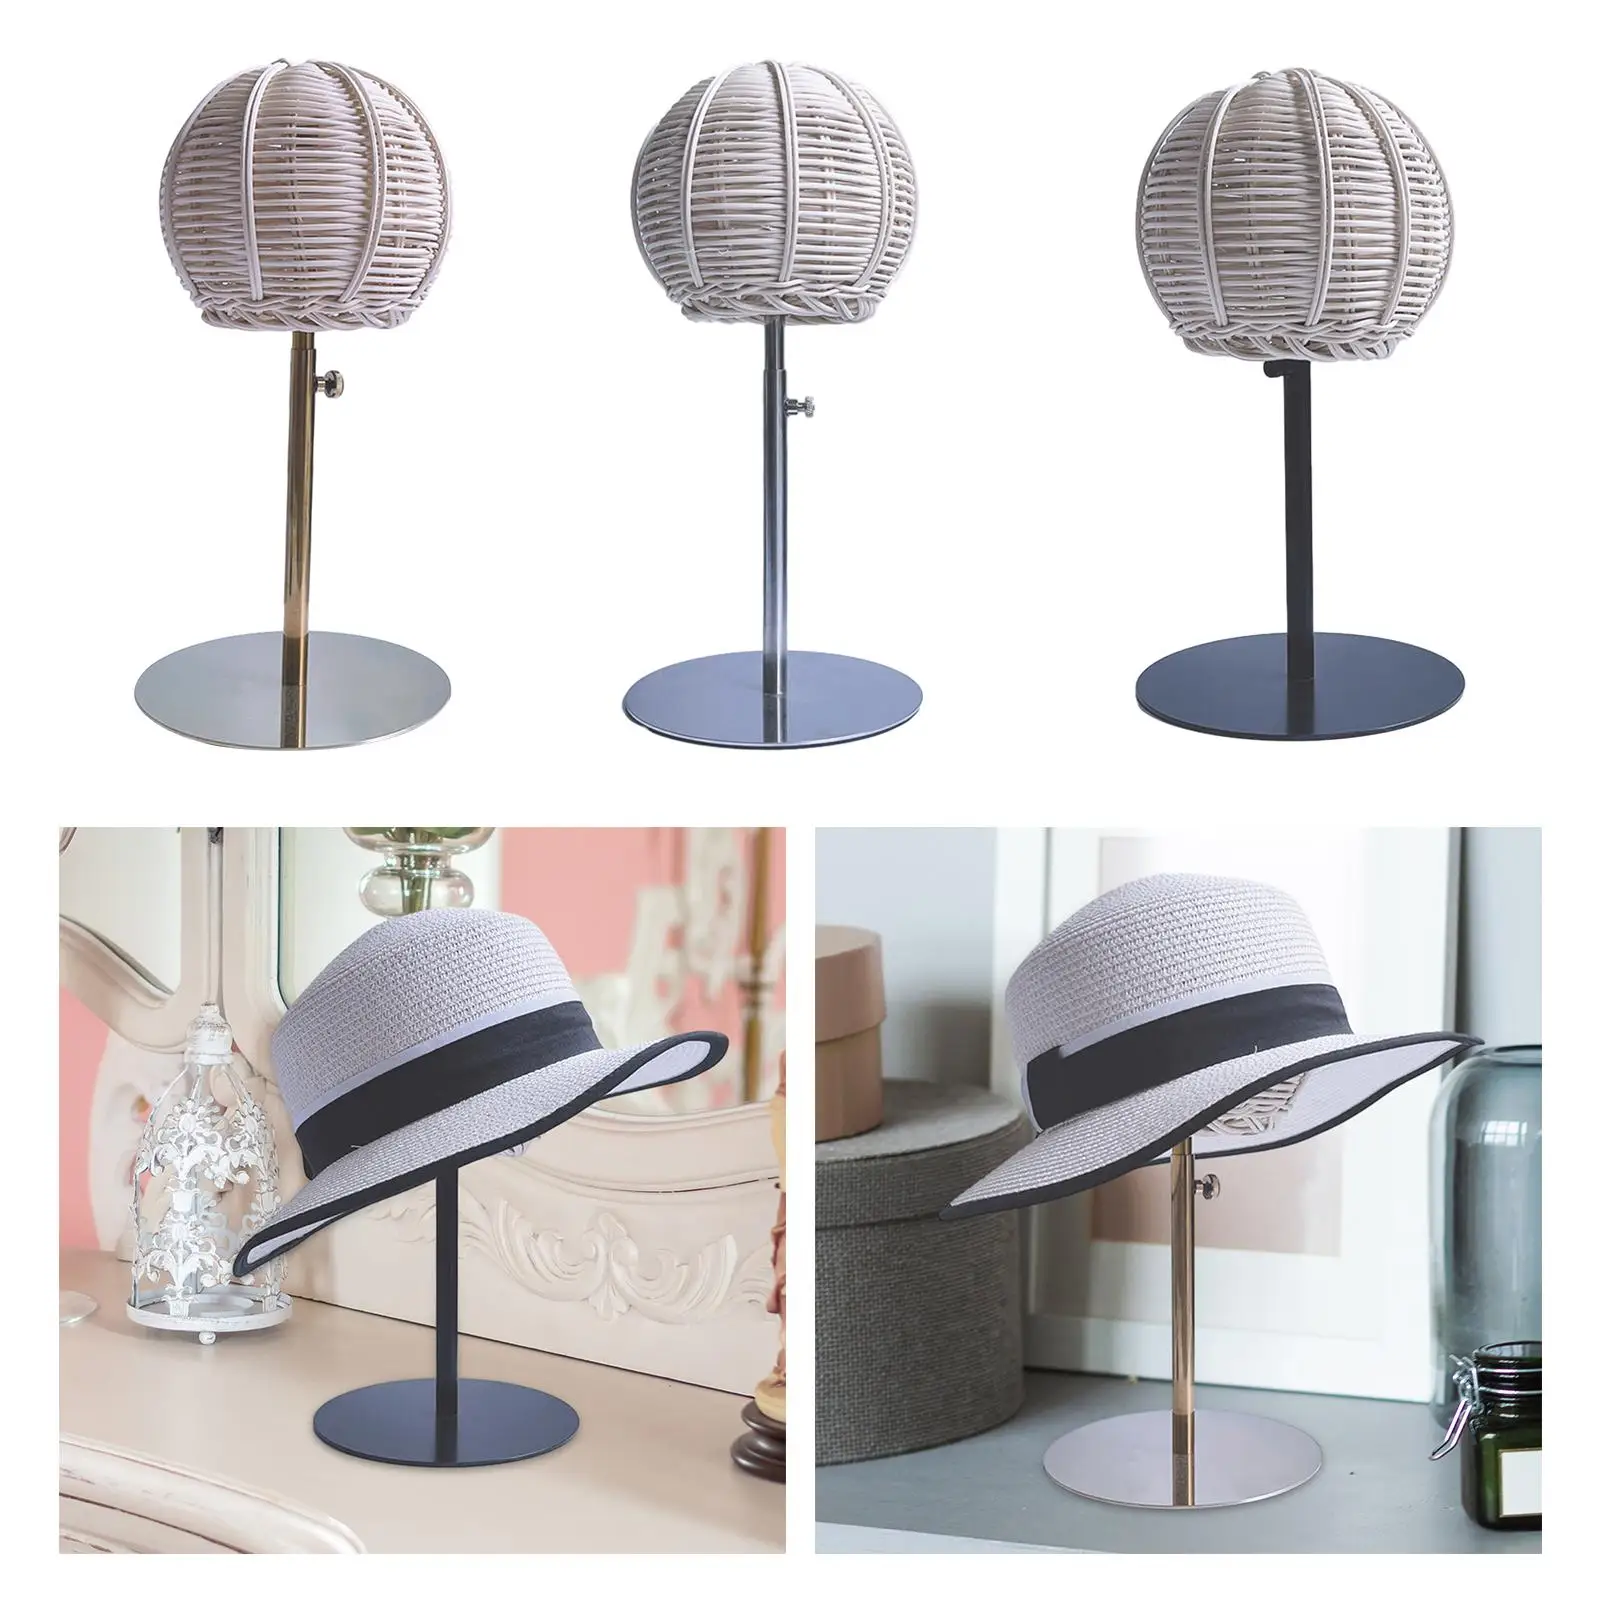 Hat Stand Durable Multipurpose Adjustable Height Stainless Steel Cap Storage Holder Hat Display Rack for Shop Home Styling Salon